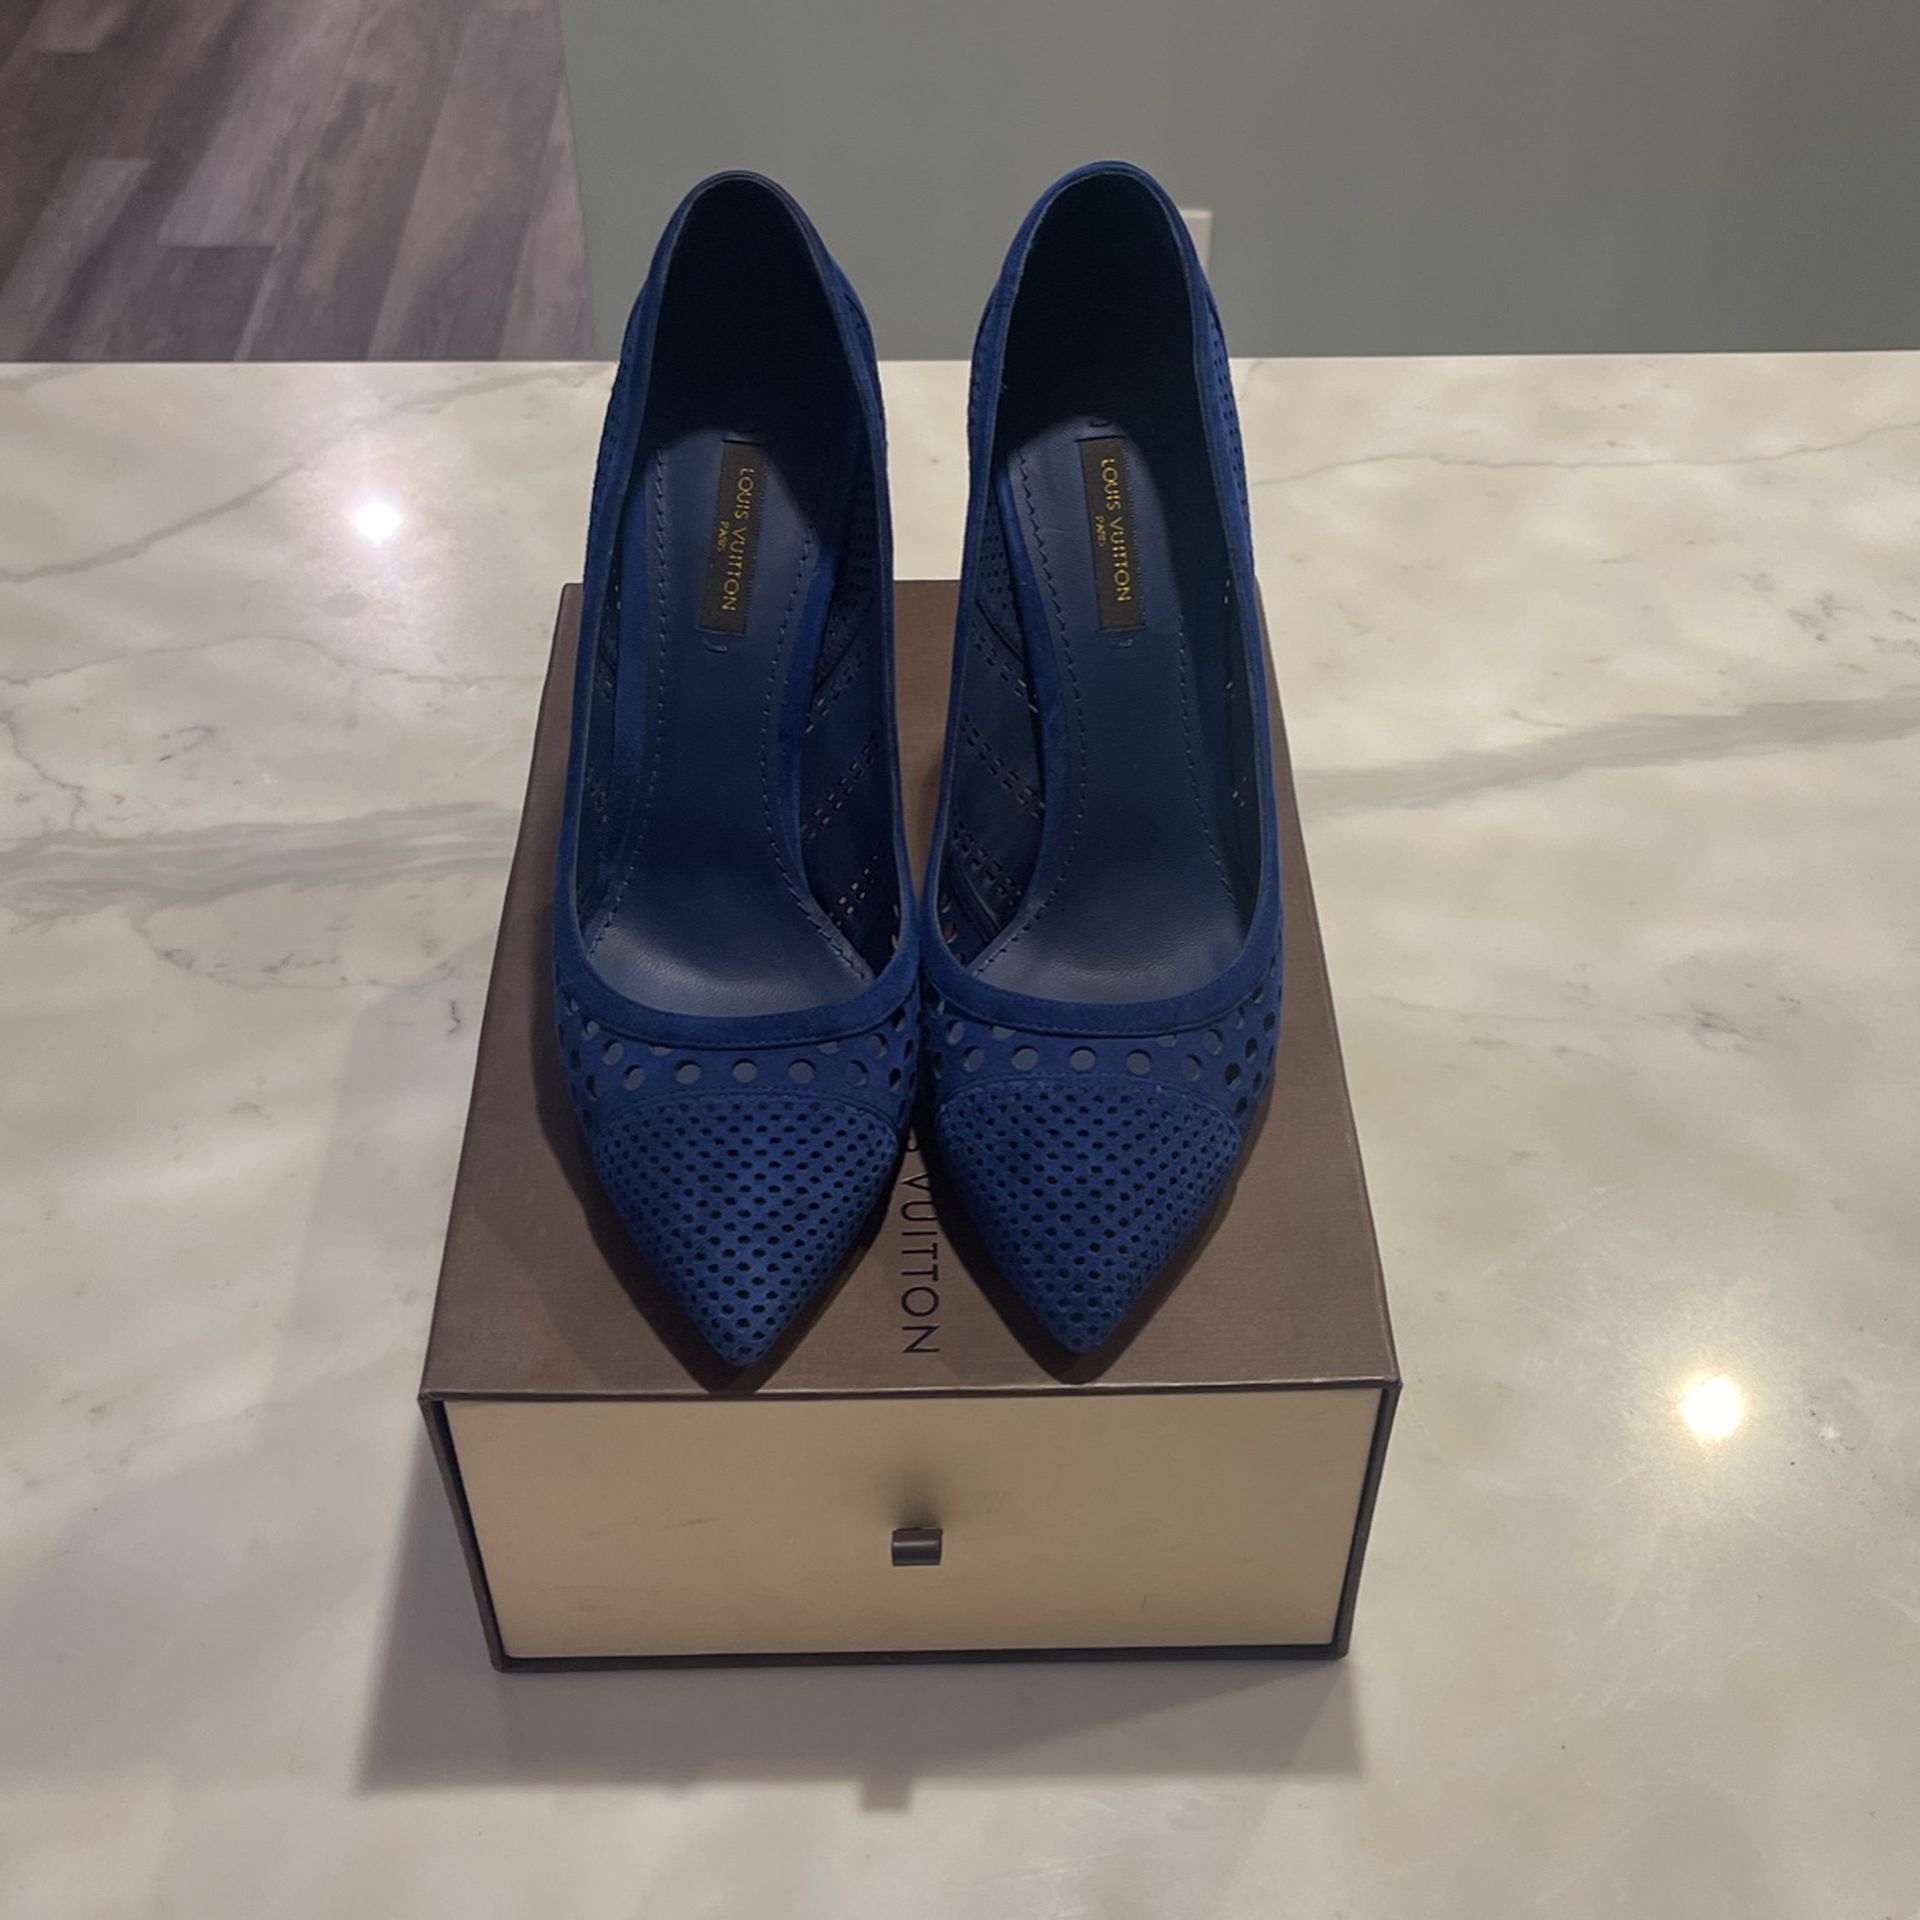 LV-Louis Vuitton Heels Size 8- 9\10 condition 100$ Or best Offer for Sale  in Puyallup, WA - OfferUp